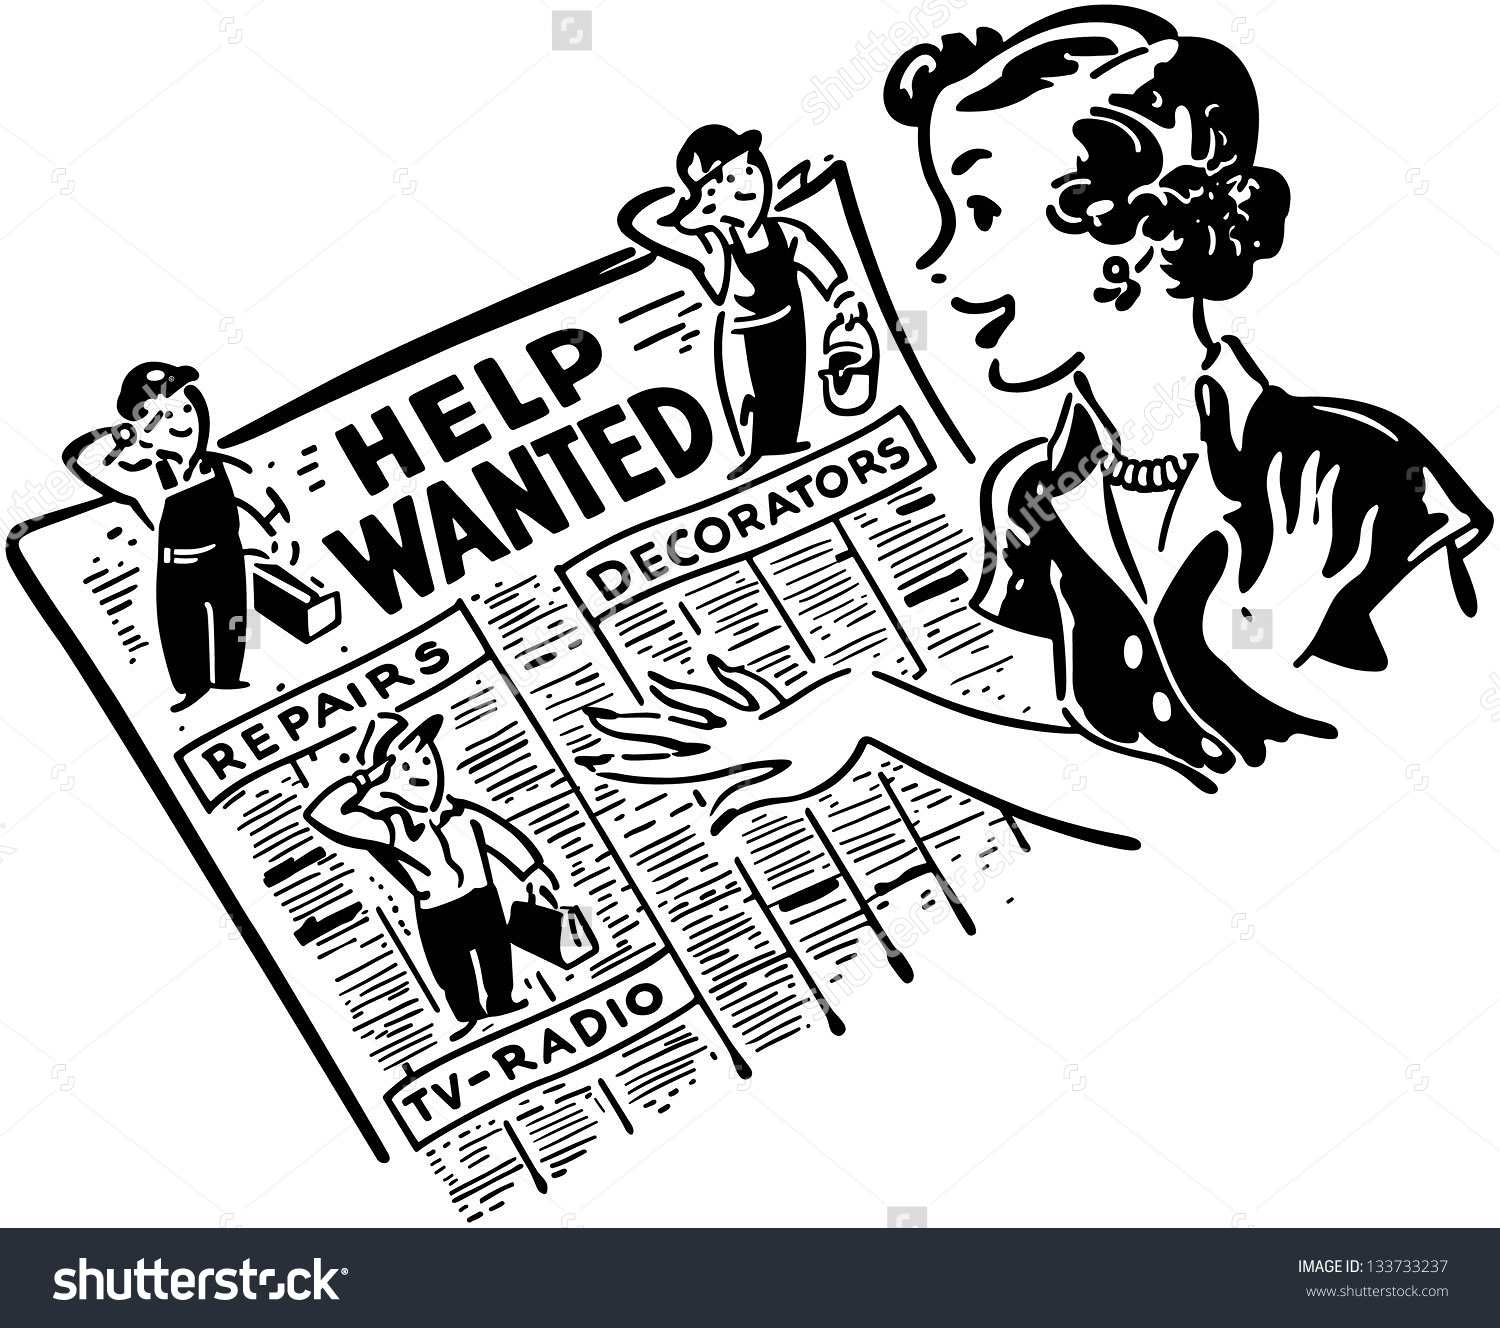 Gal Reading Help Wanted Ads - Retro Clip Art Illustration